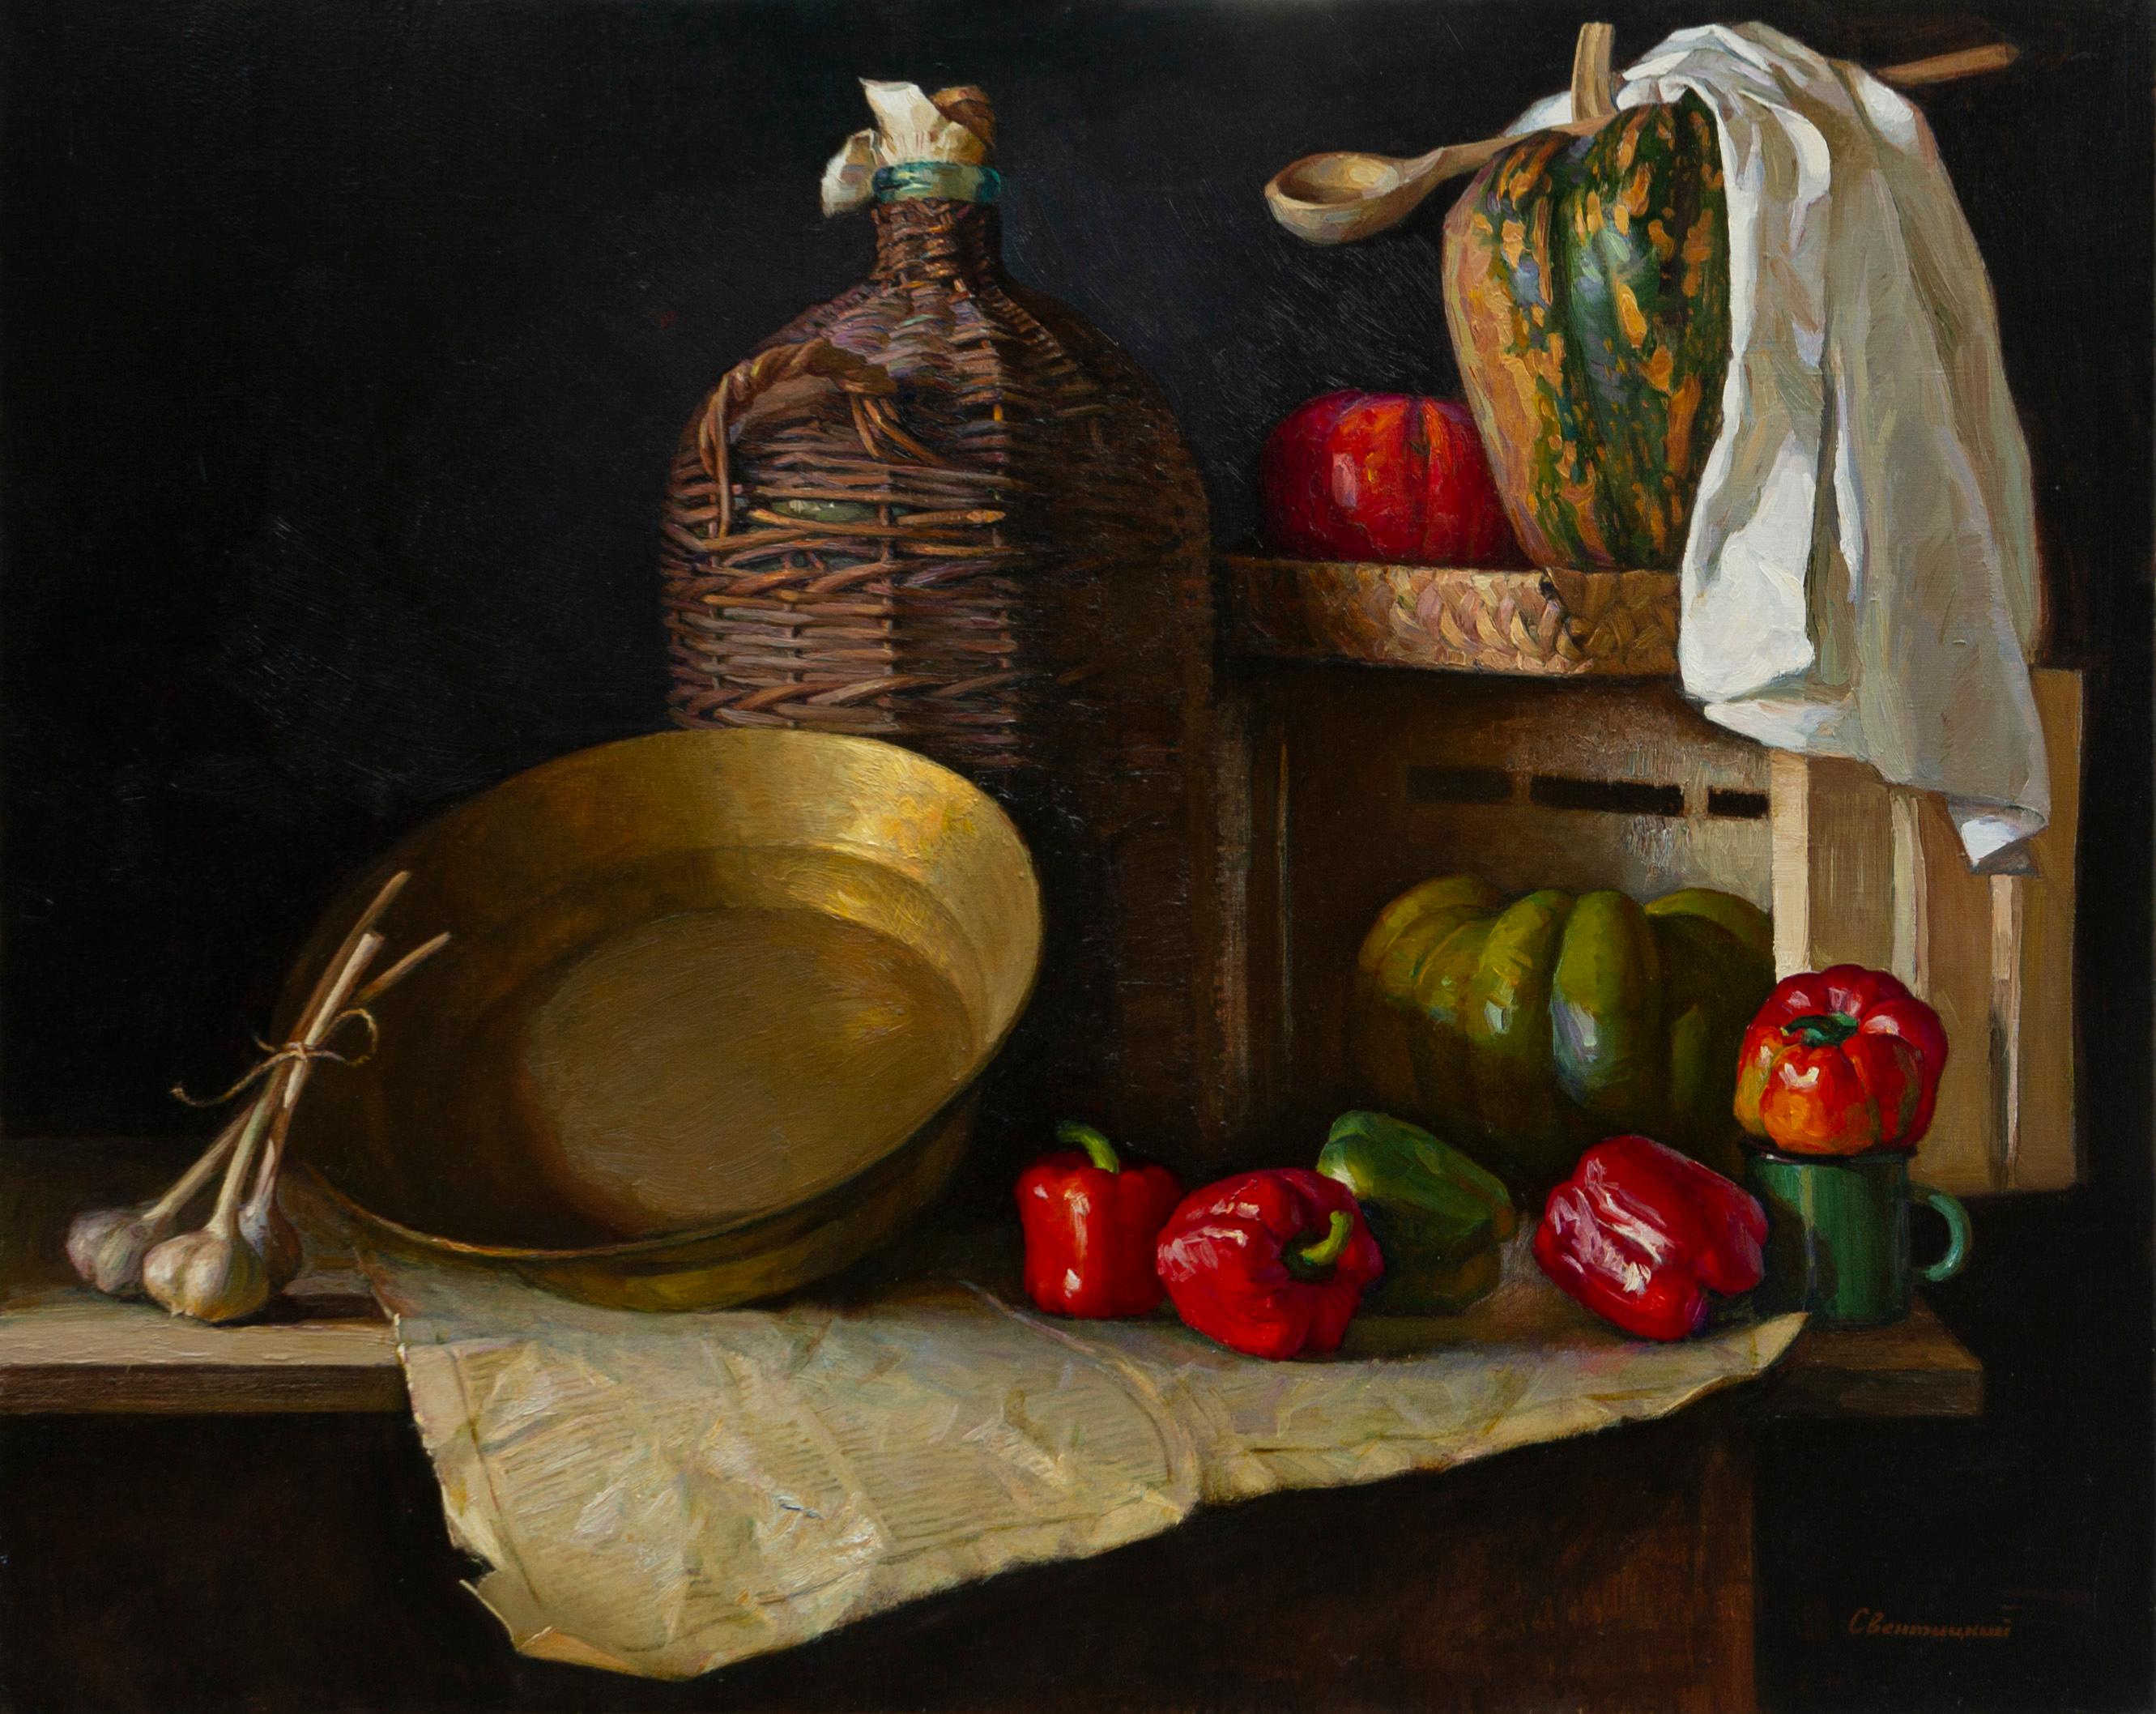 Original oil painting on canvas, still life painting made under natural light. This artwork is painted using high-quality fine linen canvas and sold unframed, stretched, and ready to hang with a hook on the back. Signed on the front and back of